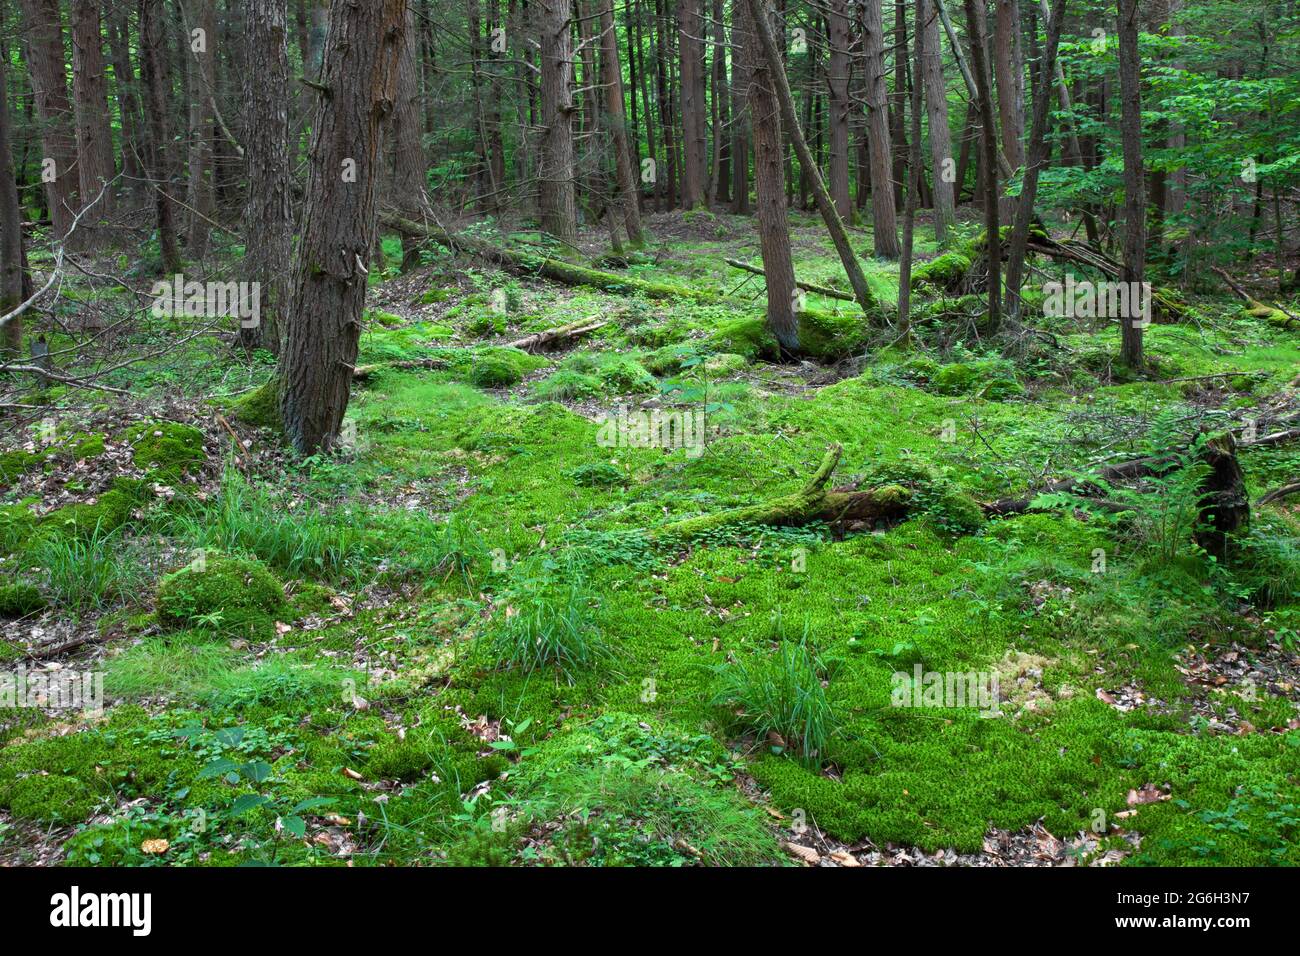 A moist area in an eastern hemlock forest. with sphagnum moss, sedges, and other wetland plants. Stock Photo